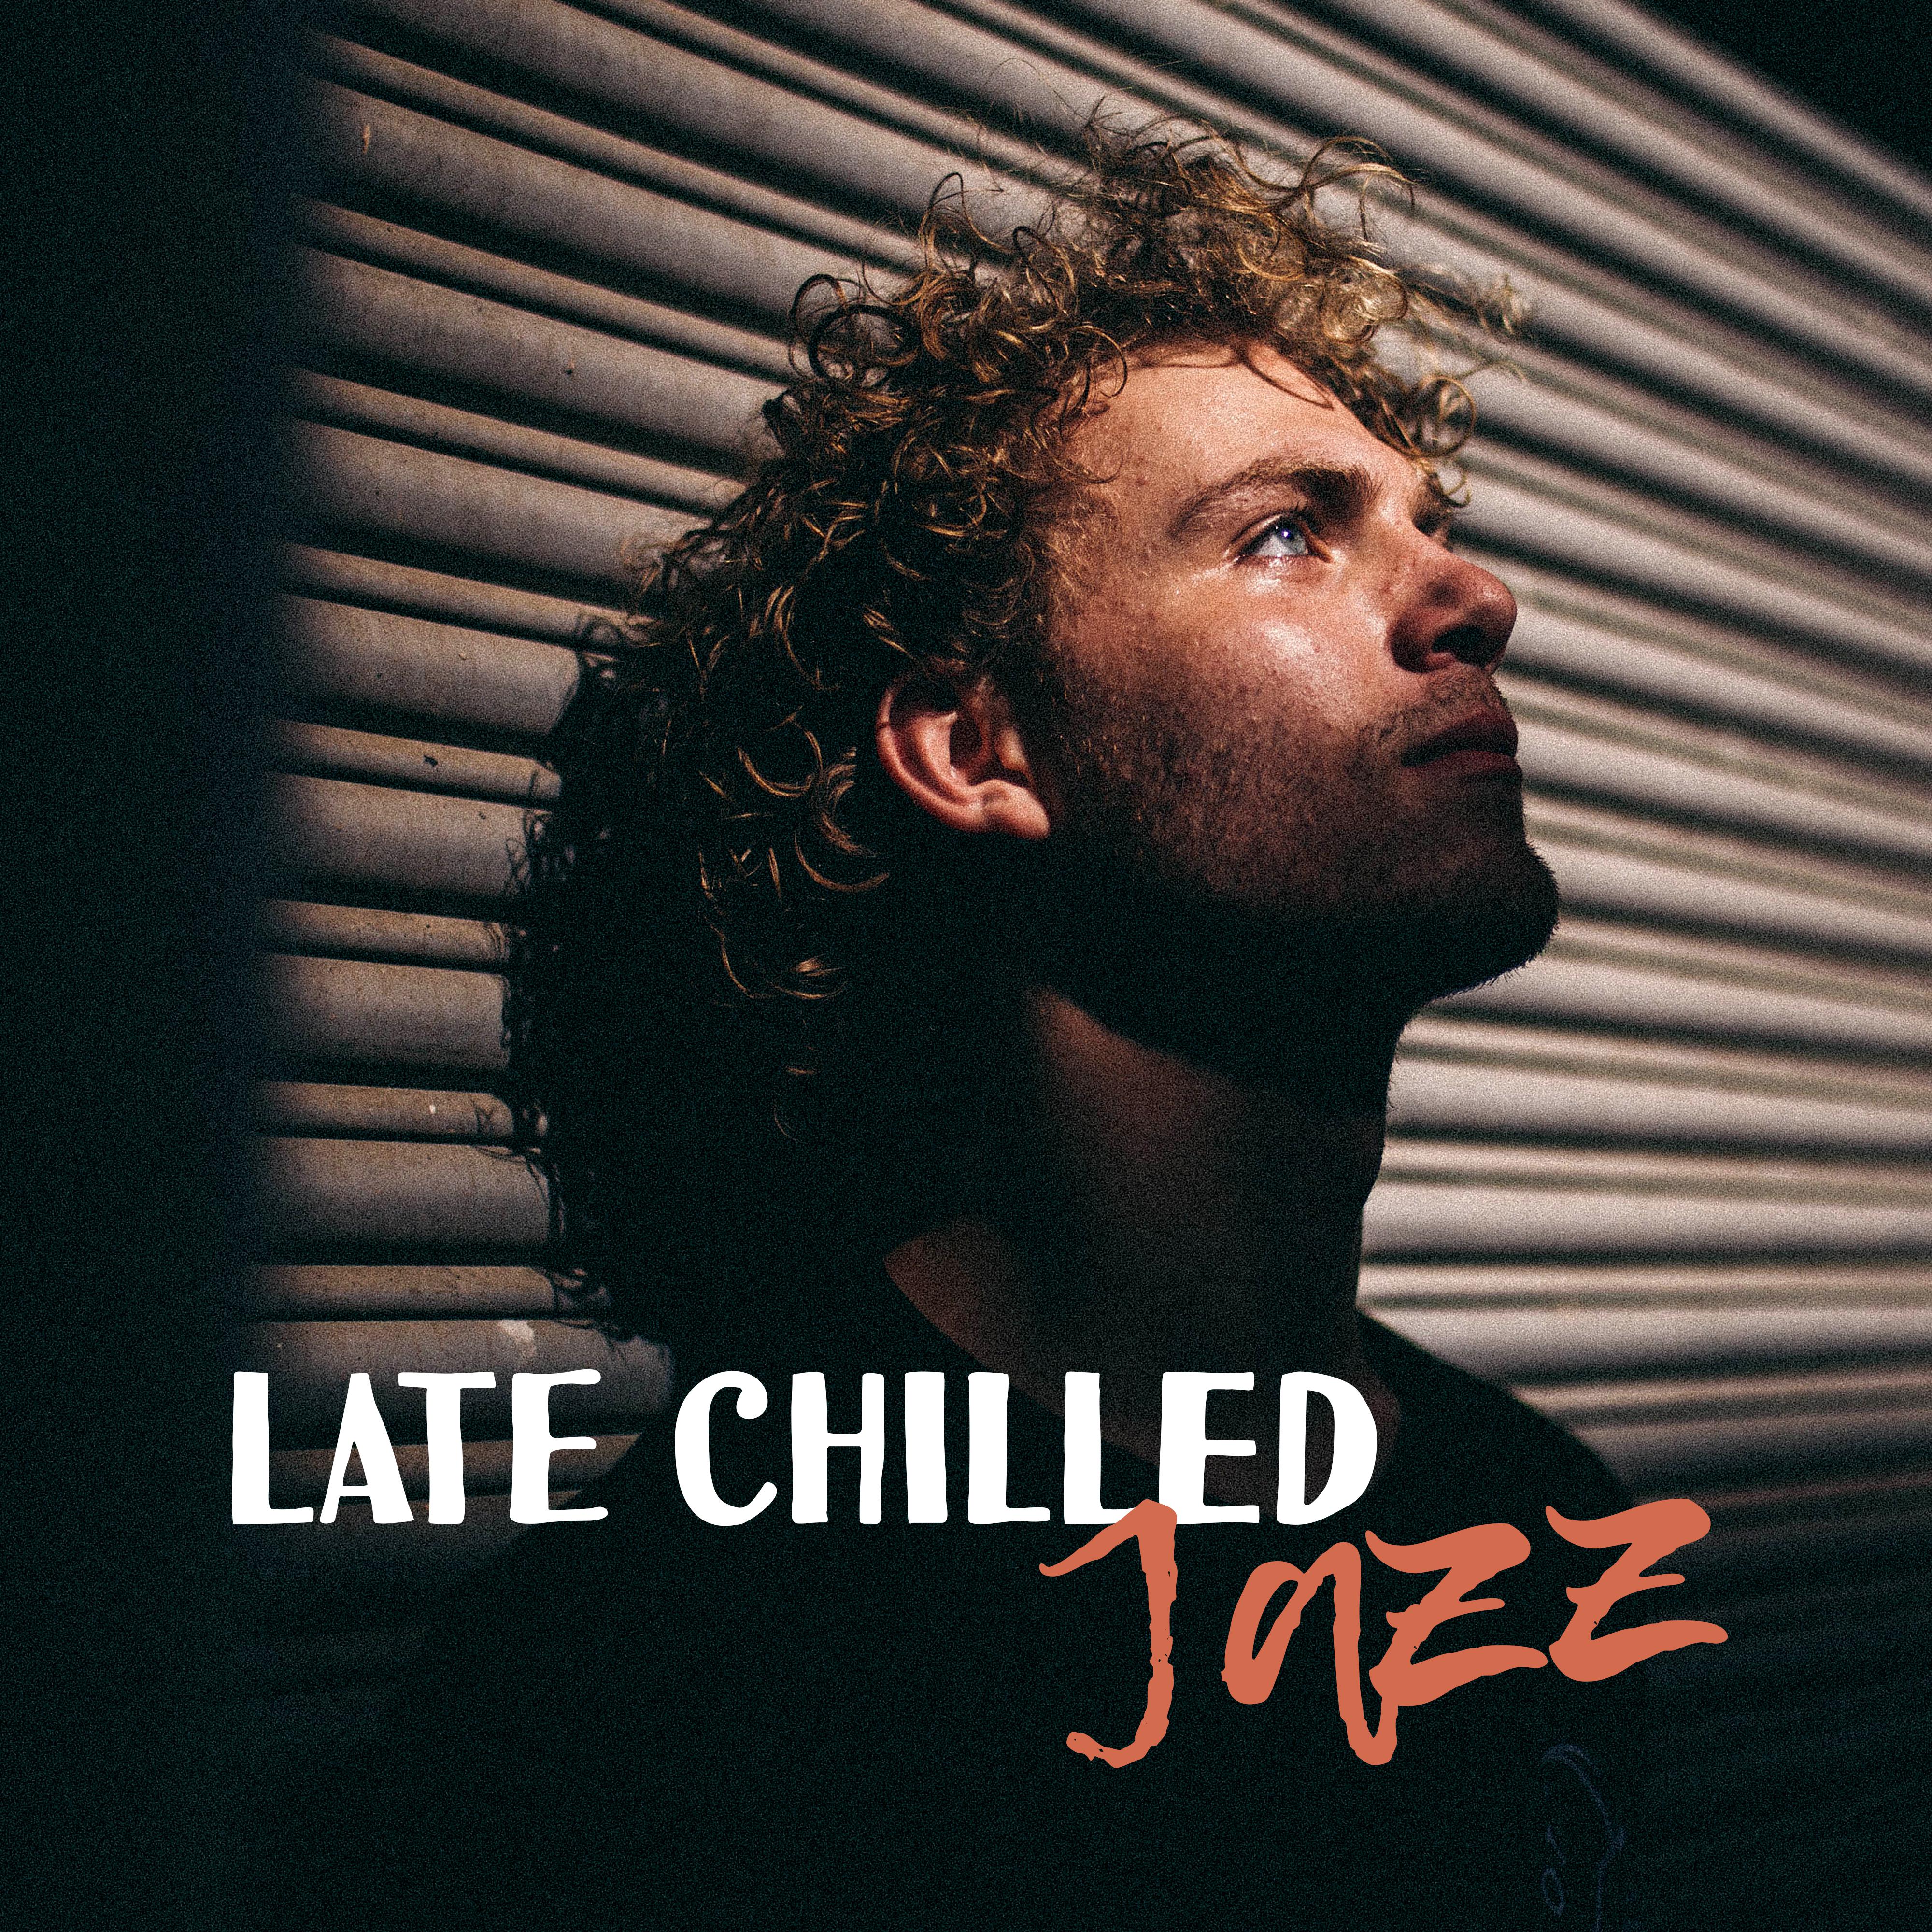 Late Chilled Jazz